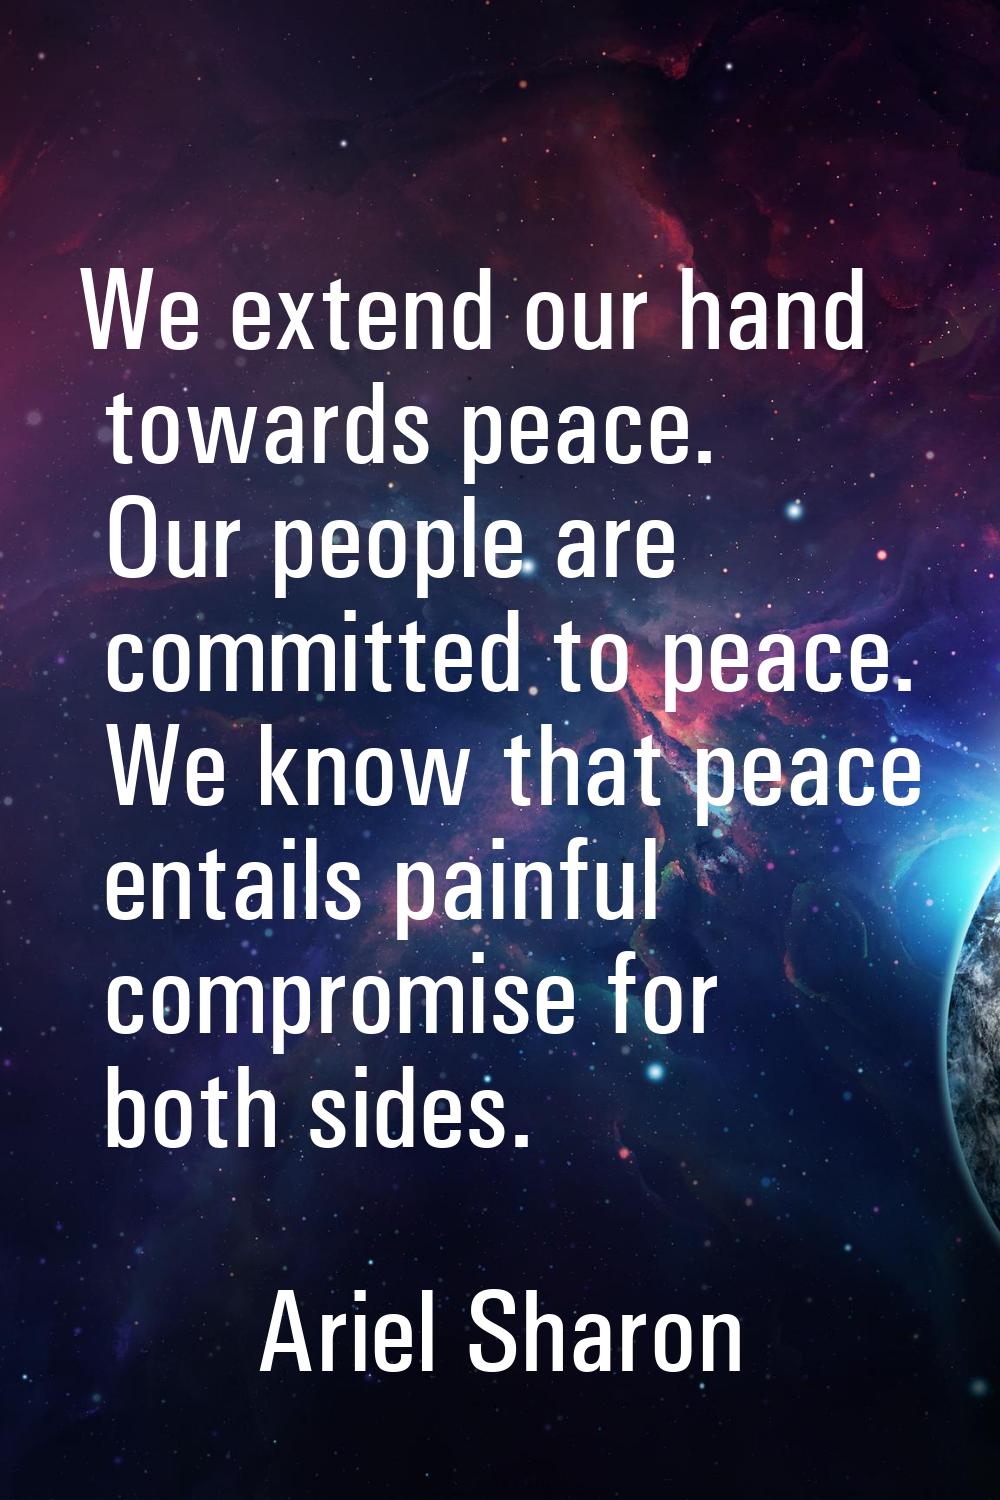 We extend our hand towards peace. Our people are committed to peace. We know that peace entails pai